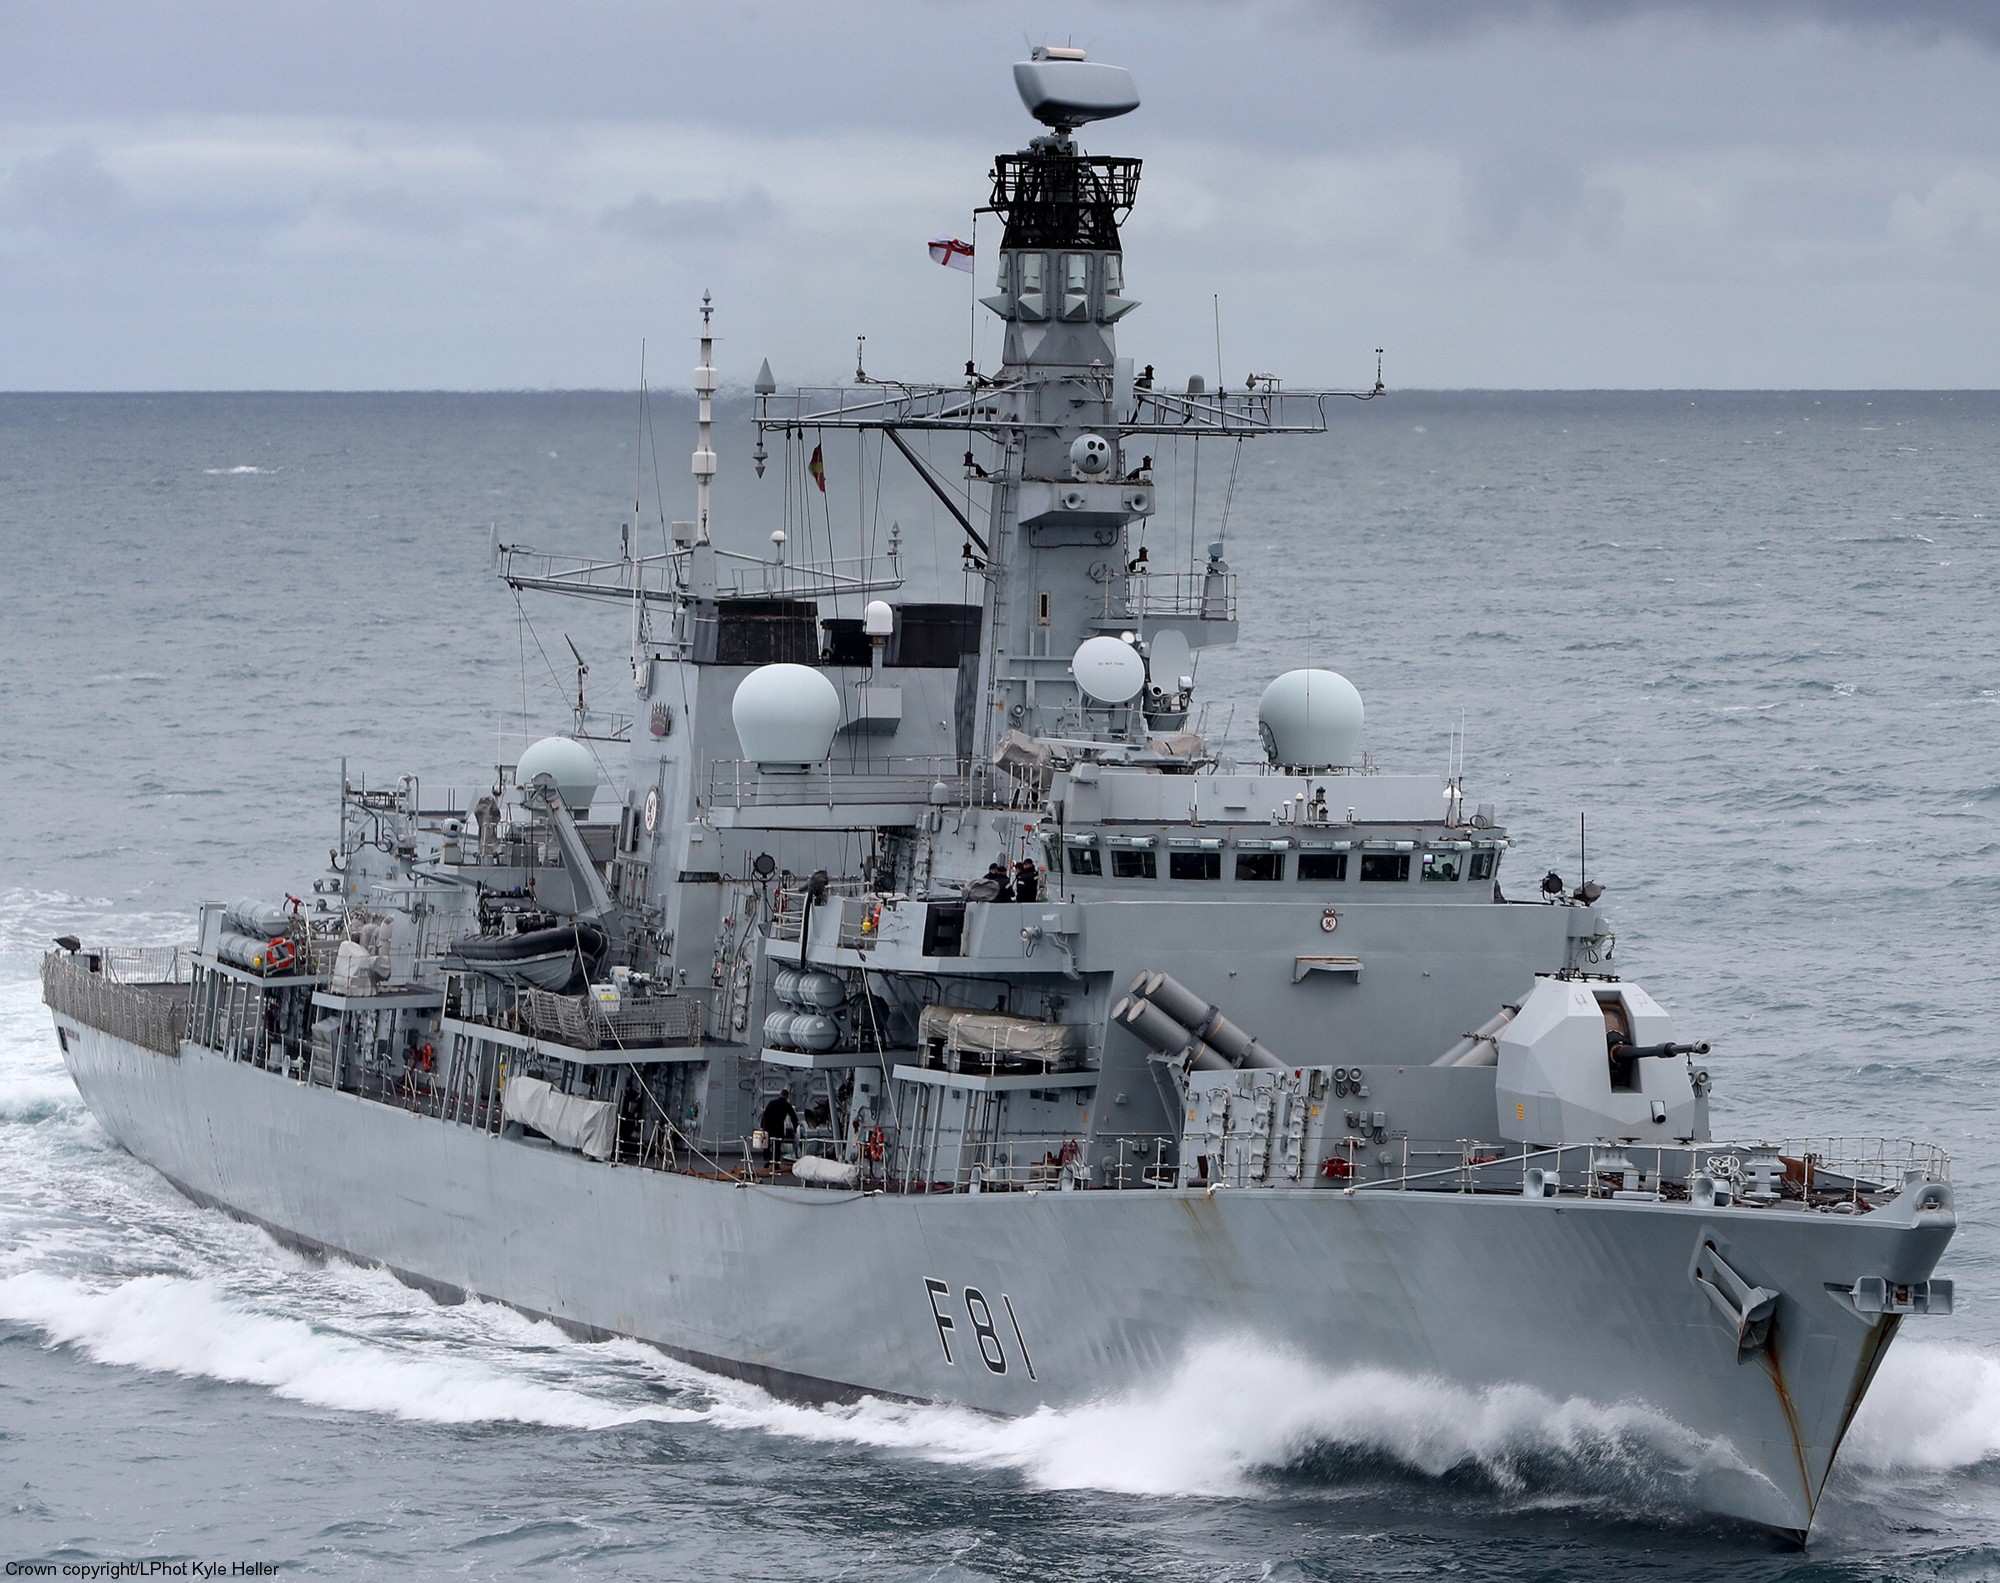 f-81 hms sutherland type 23 duke class guided missile frigate ffg royal navy 39